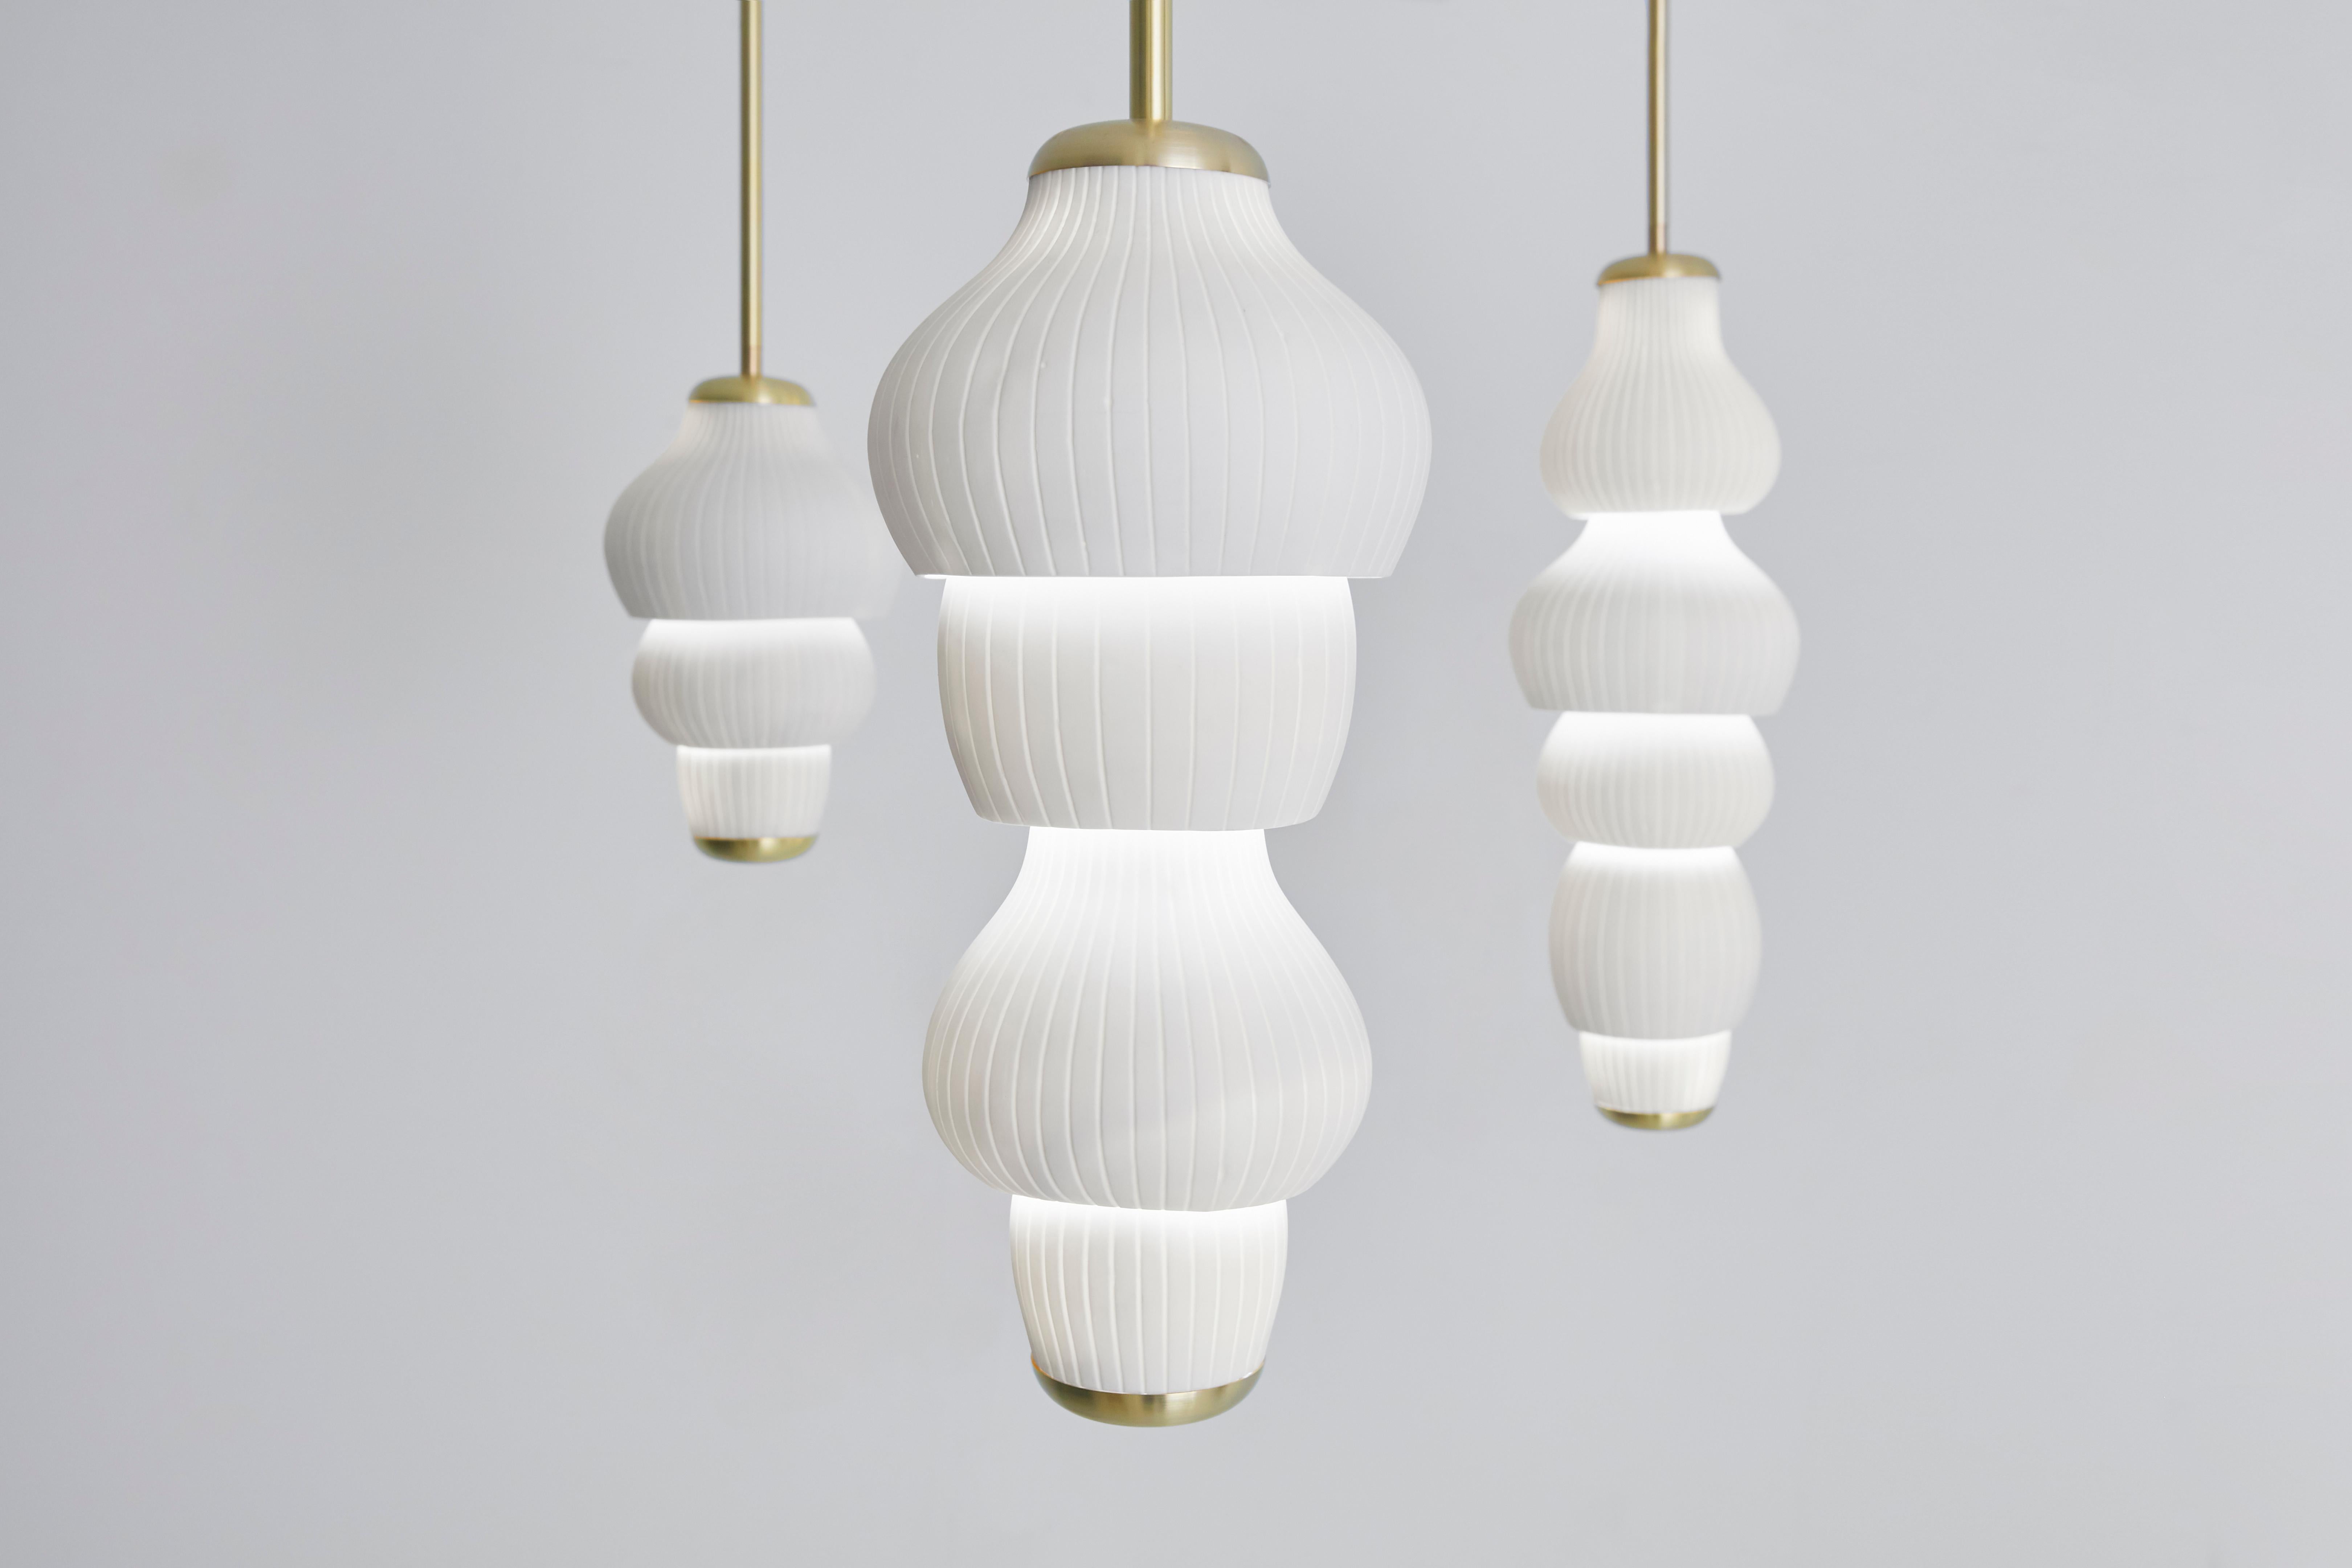 Contemporary Glaïeul Large Pendant Light by Mydriaz